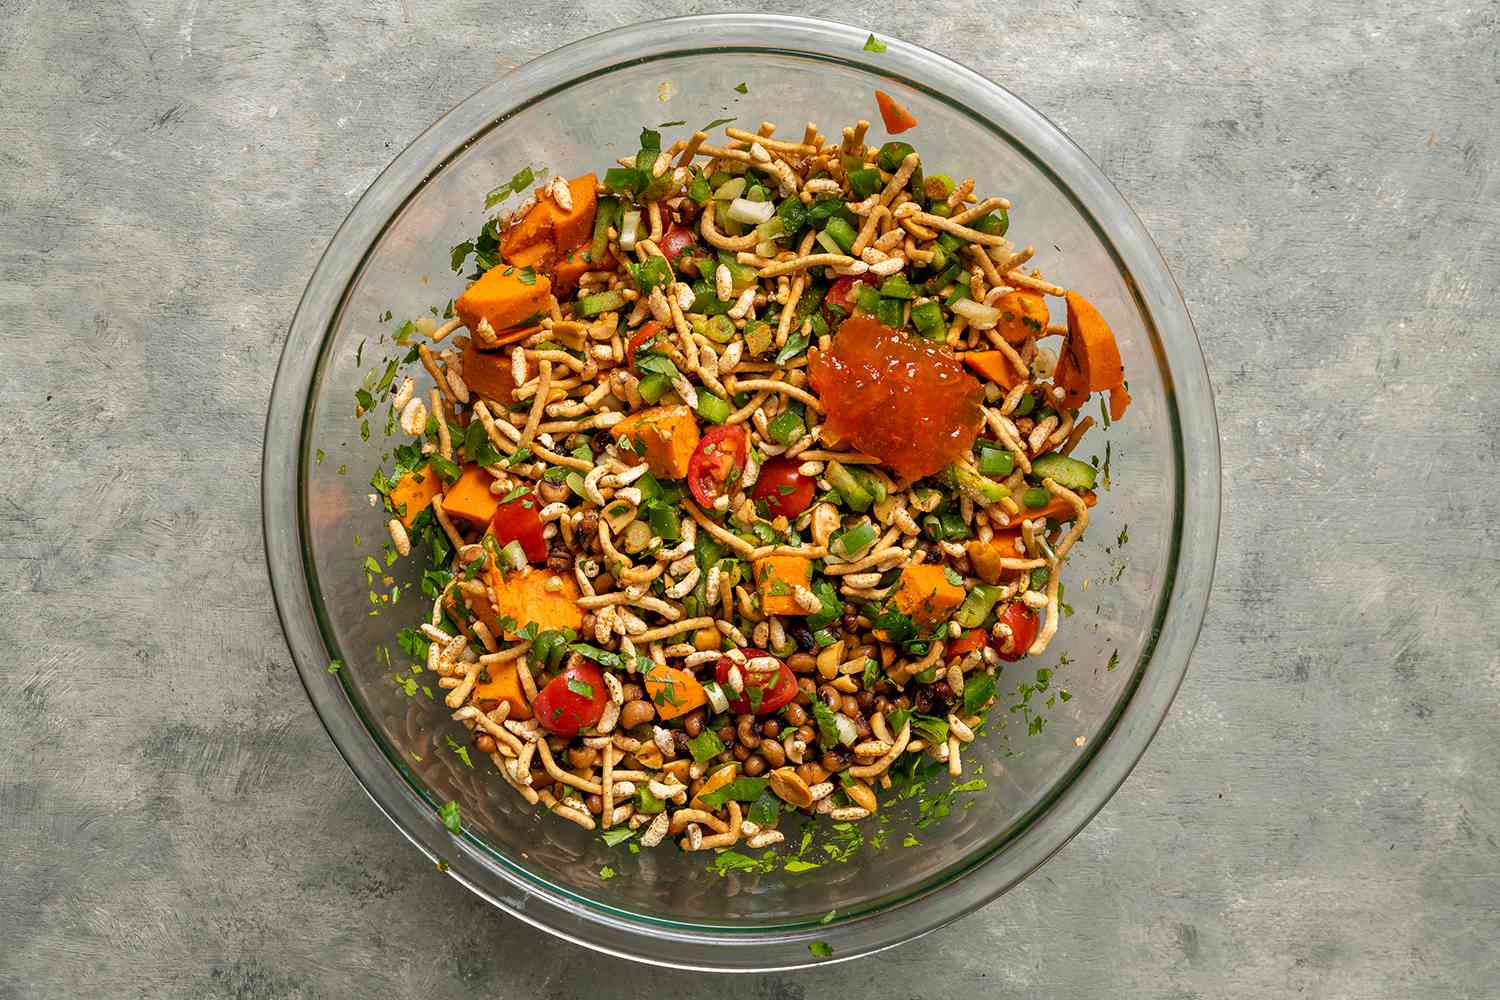 Peanuts and Peas Bhel Puri in a glass bowl, with pepper jelly 